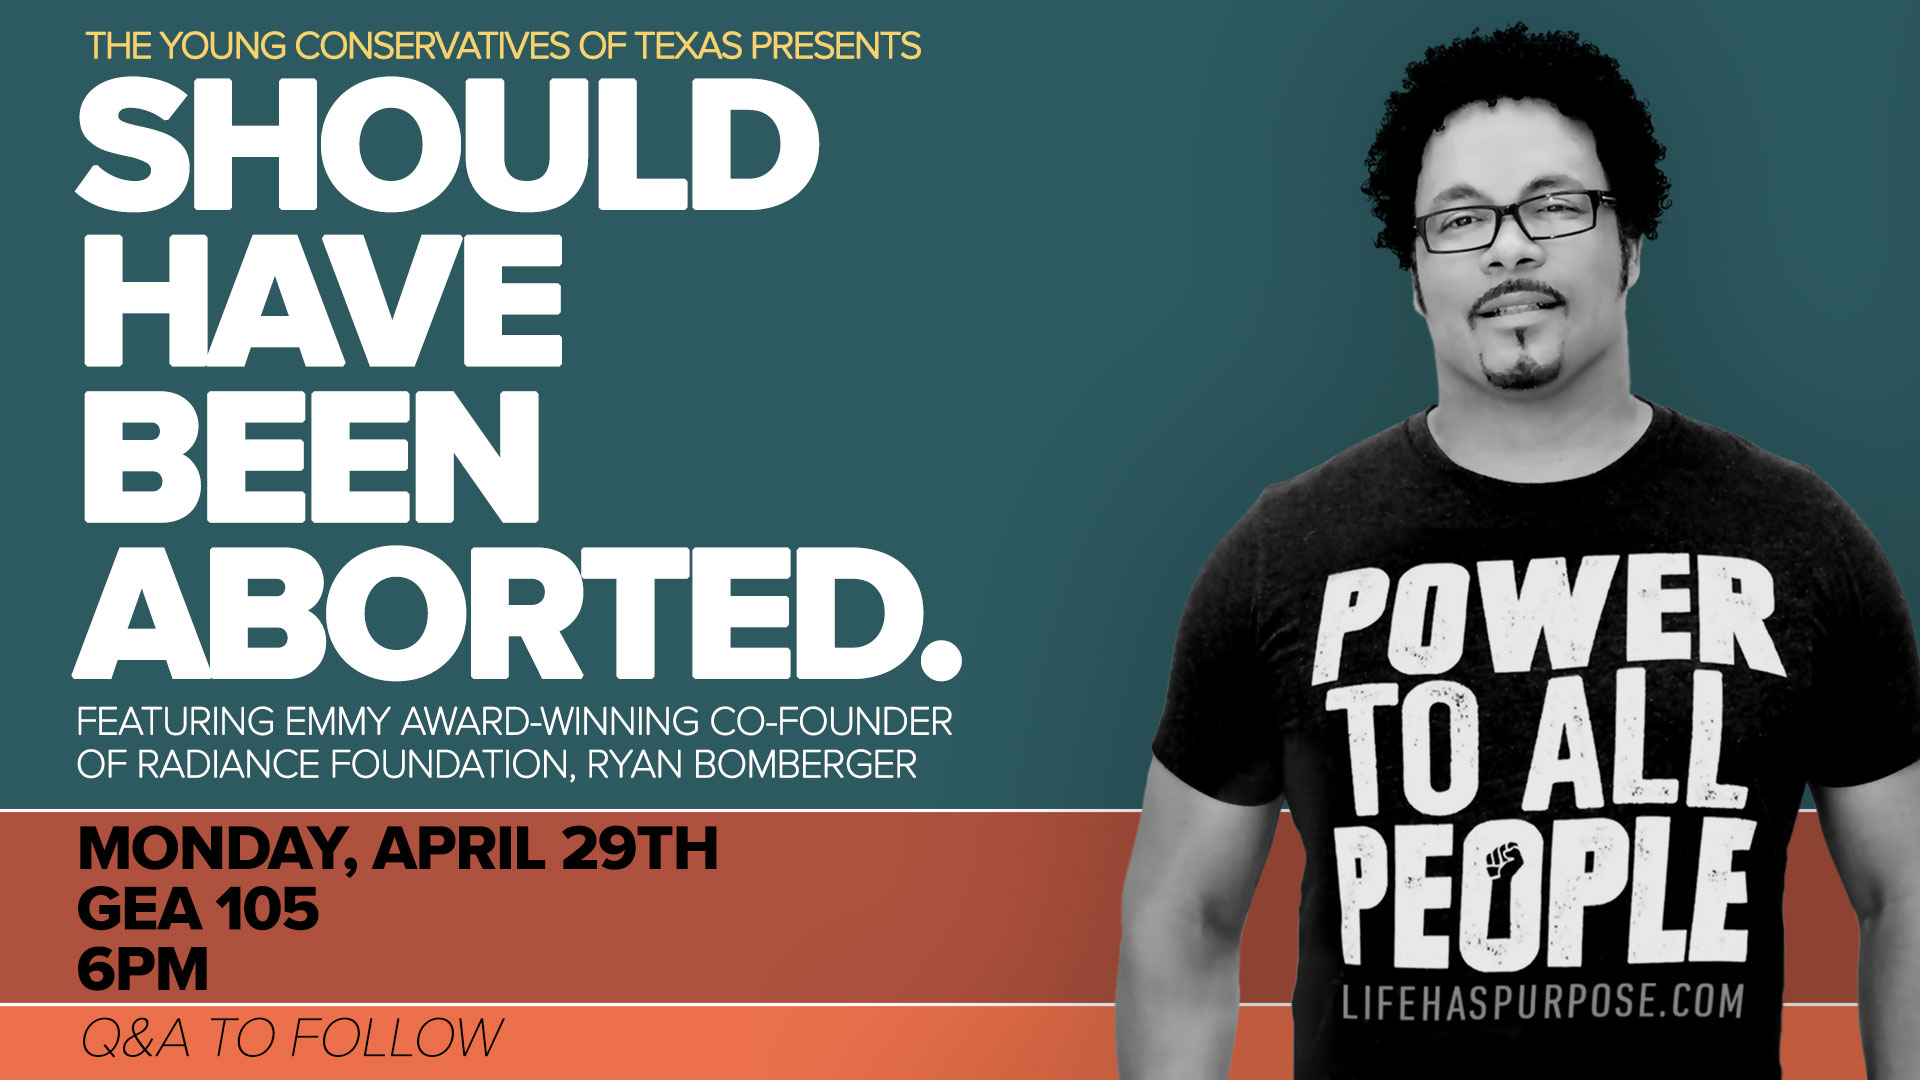 Ryan Bomberger's "Should Have Been Aborted" Talk